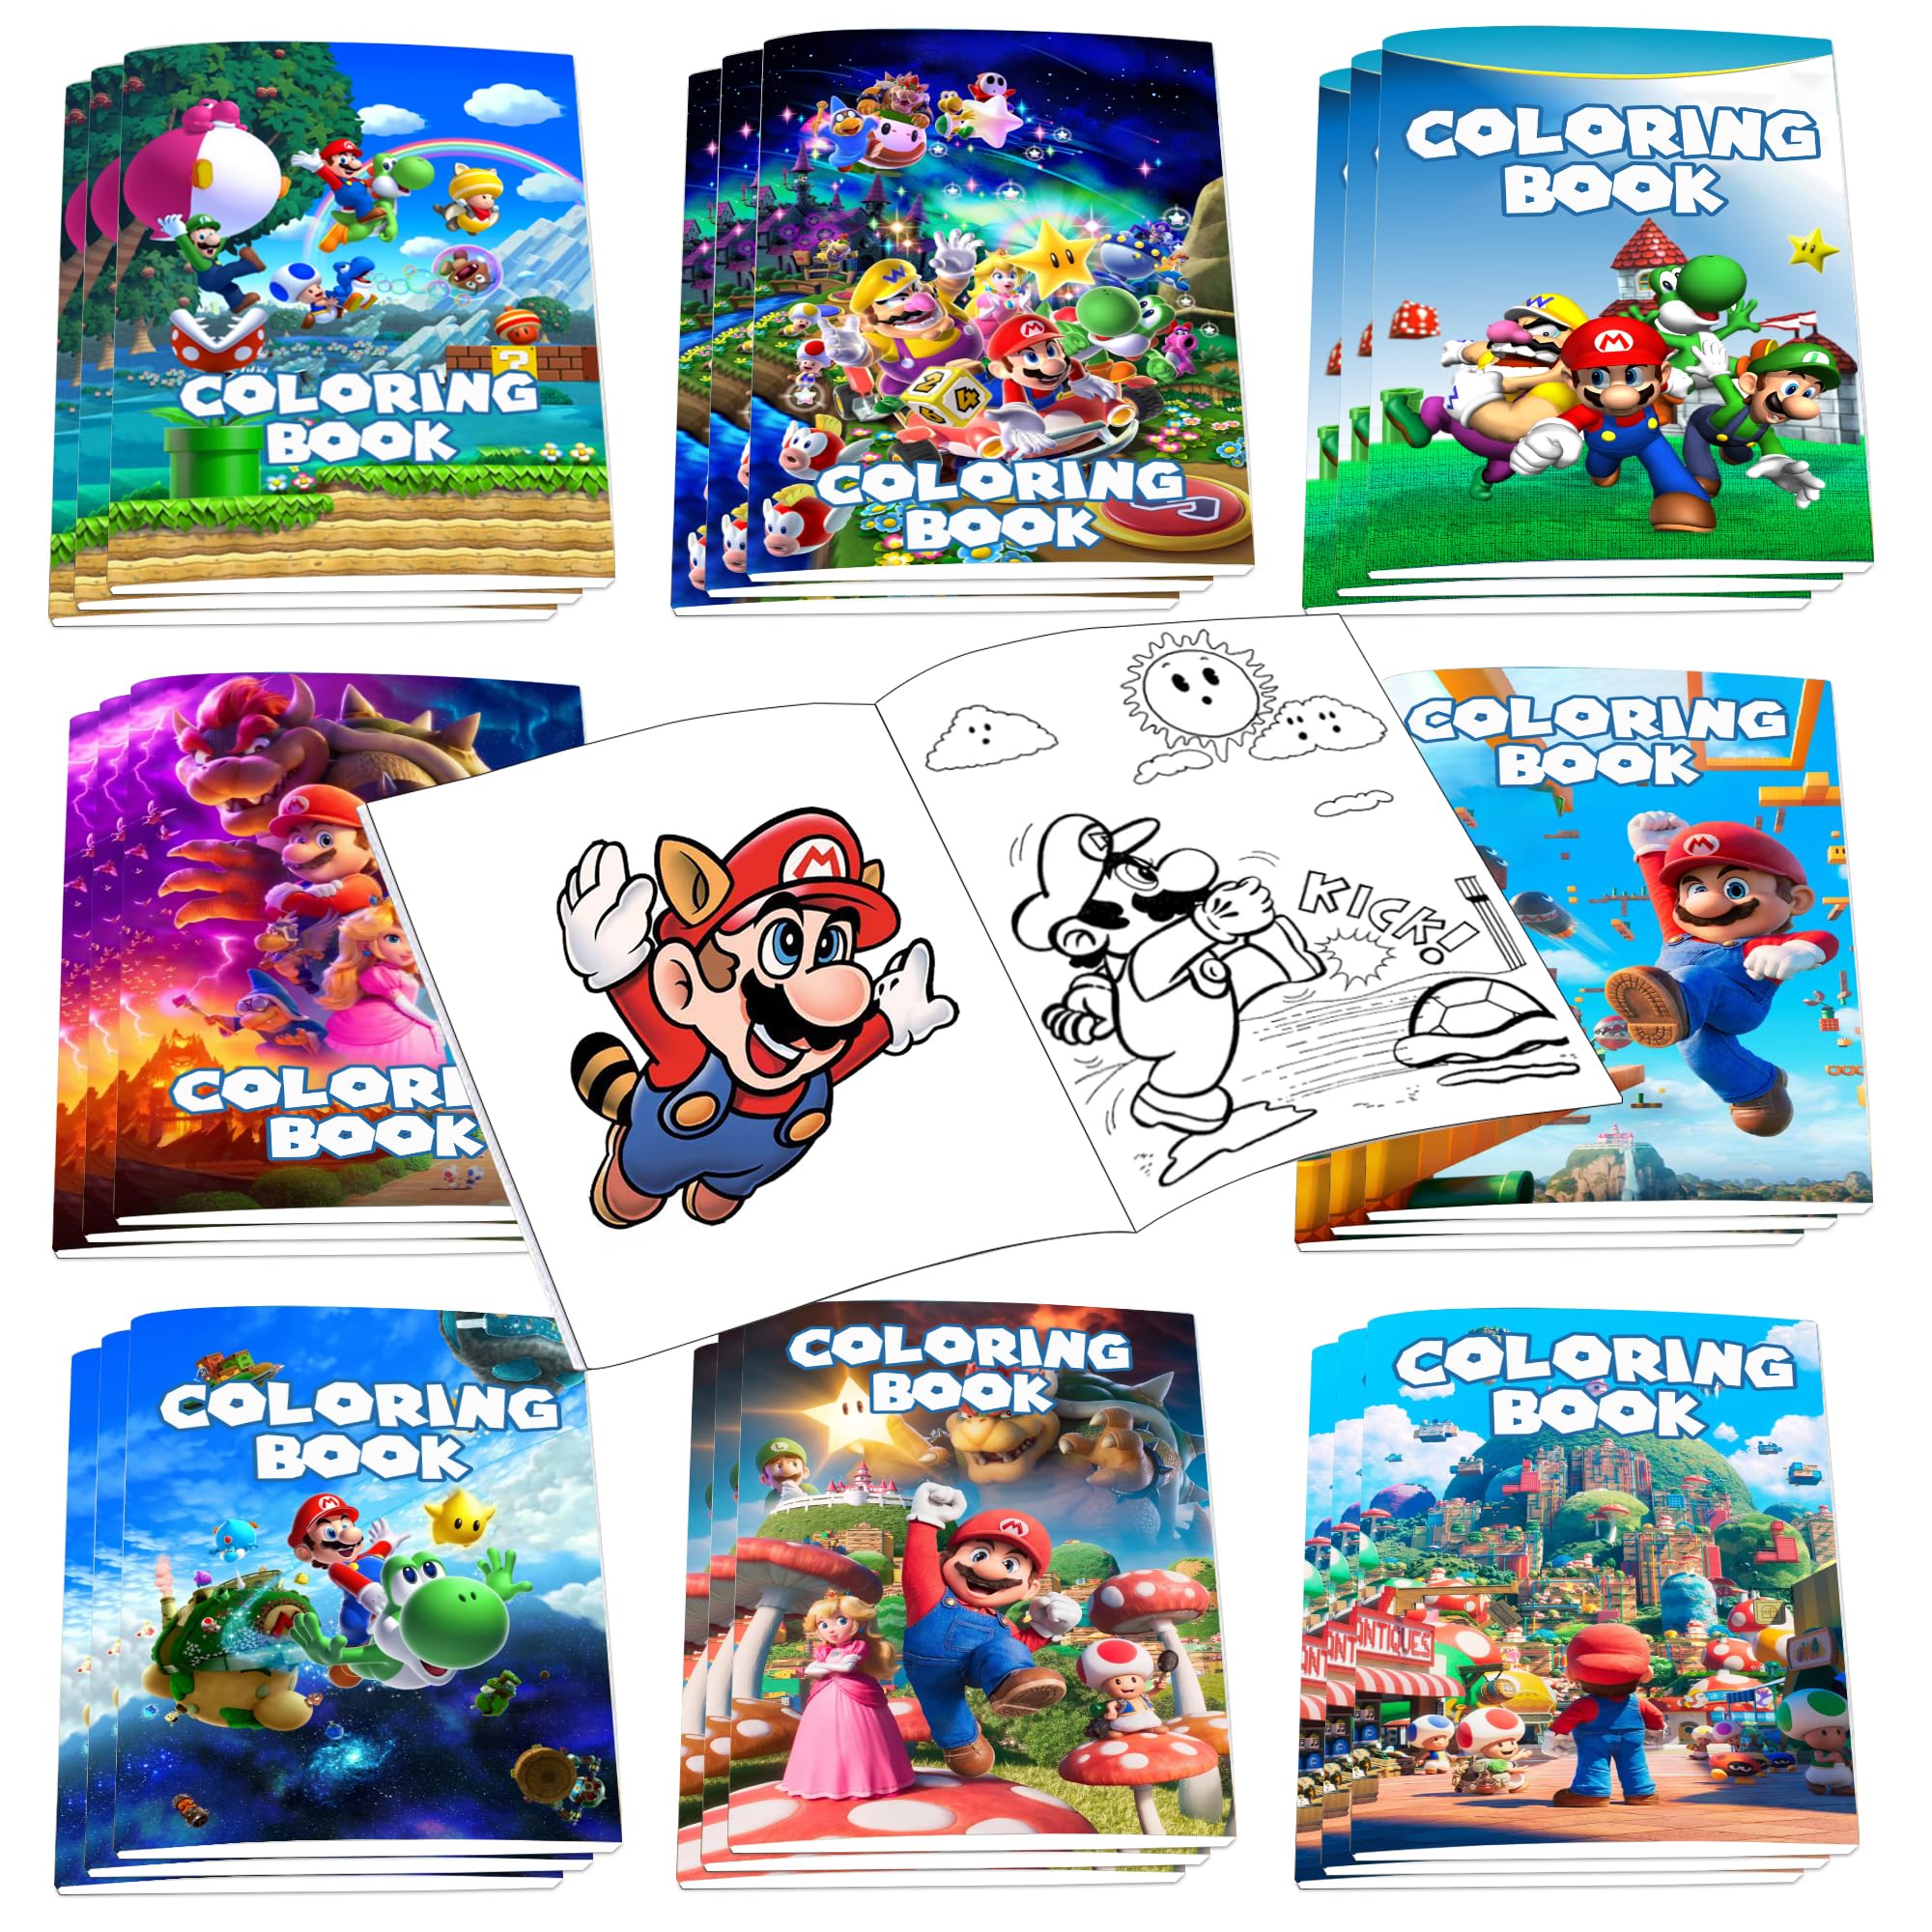 Pcs mario coloring books bulk for kids mini diy drawing book set for mario party favors birthday gifts party favors class activity supplies decorations toys games